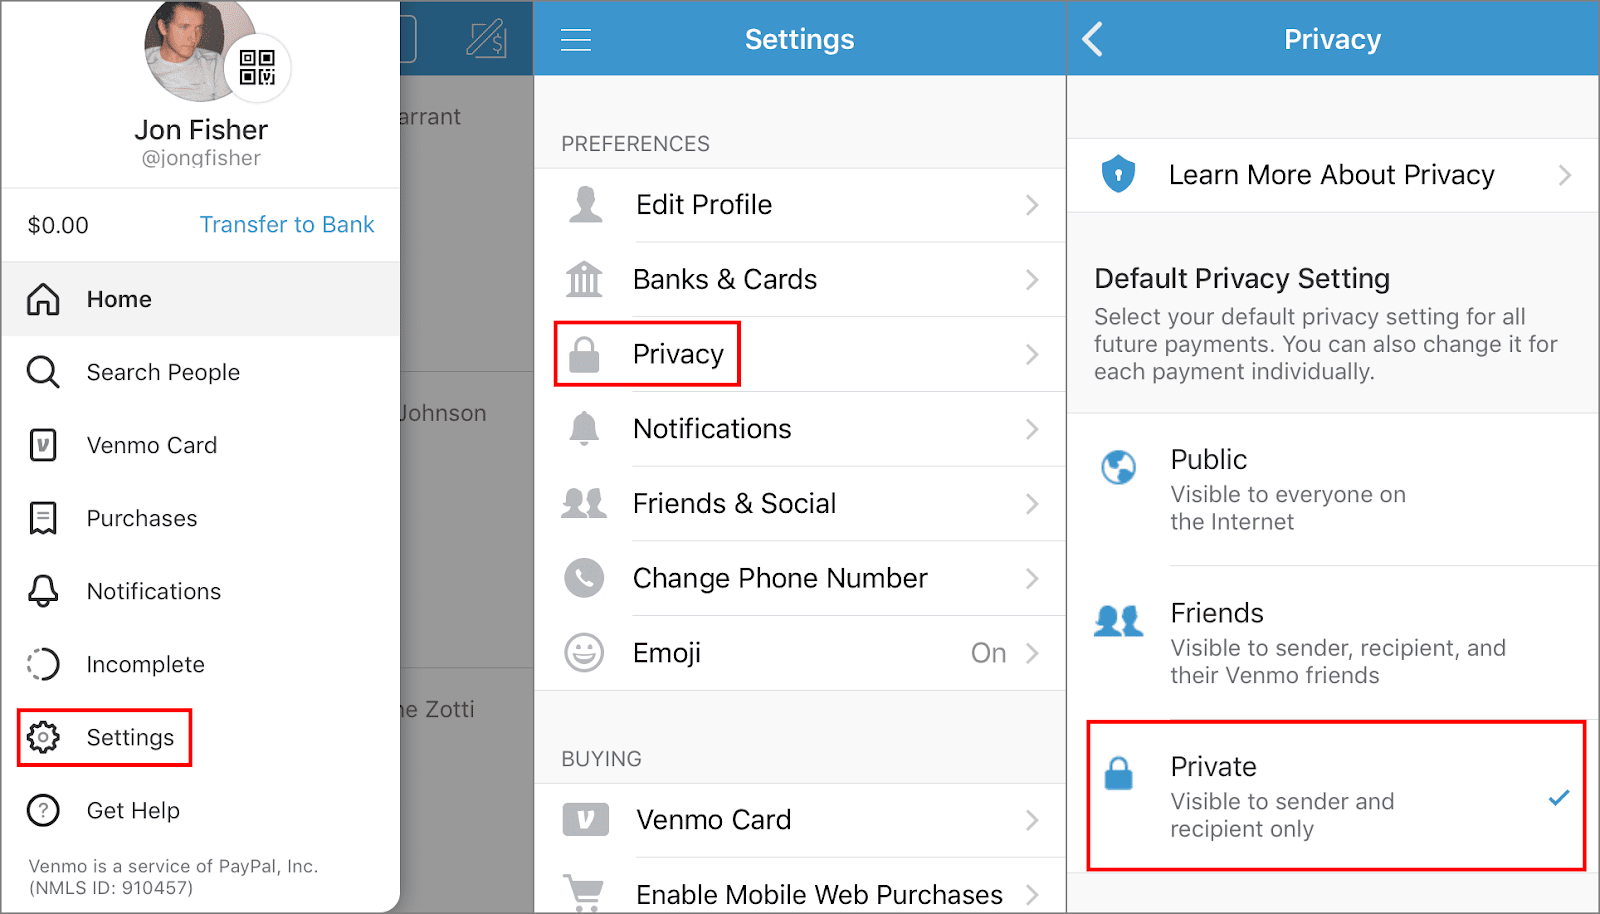 Why Use Venmo? Is It More Than Just a Way to Transfer Money?